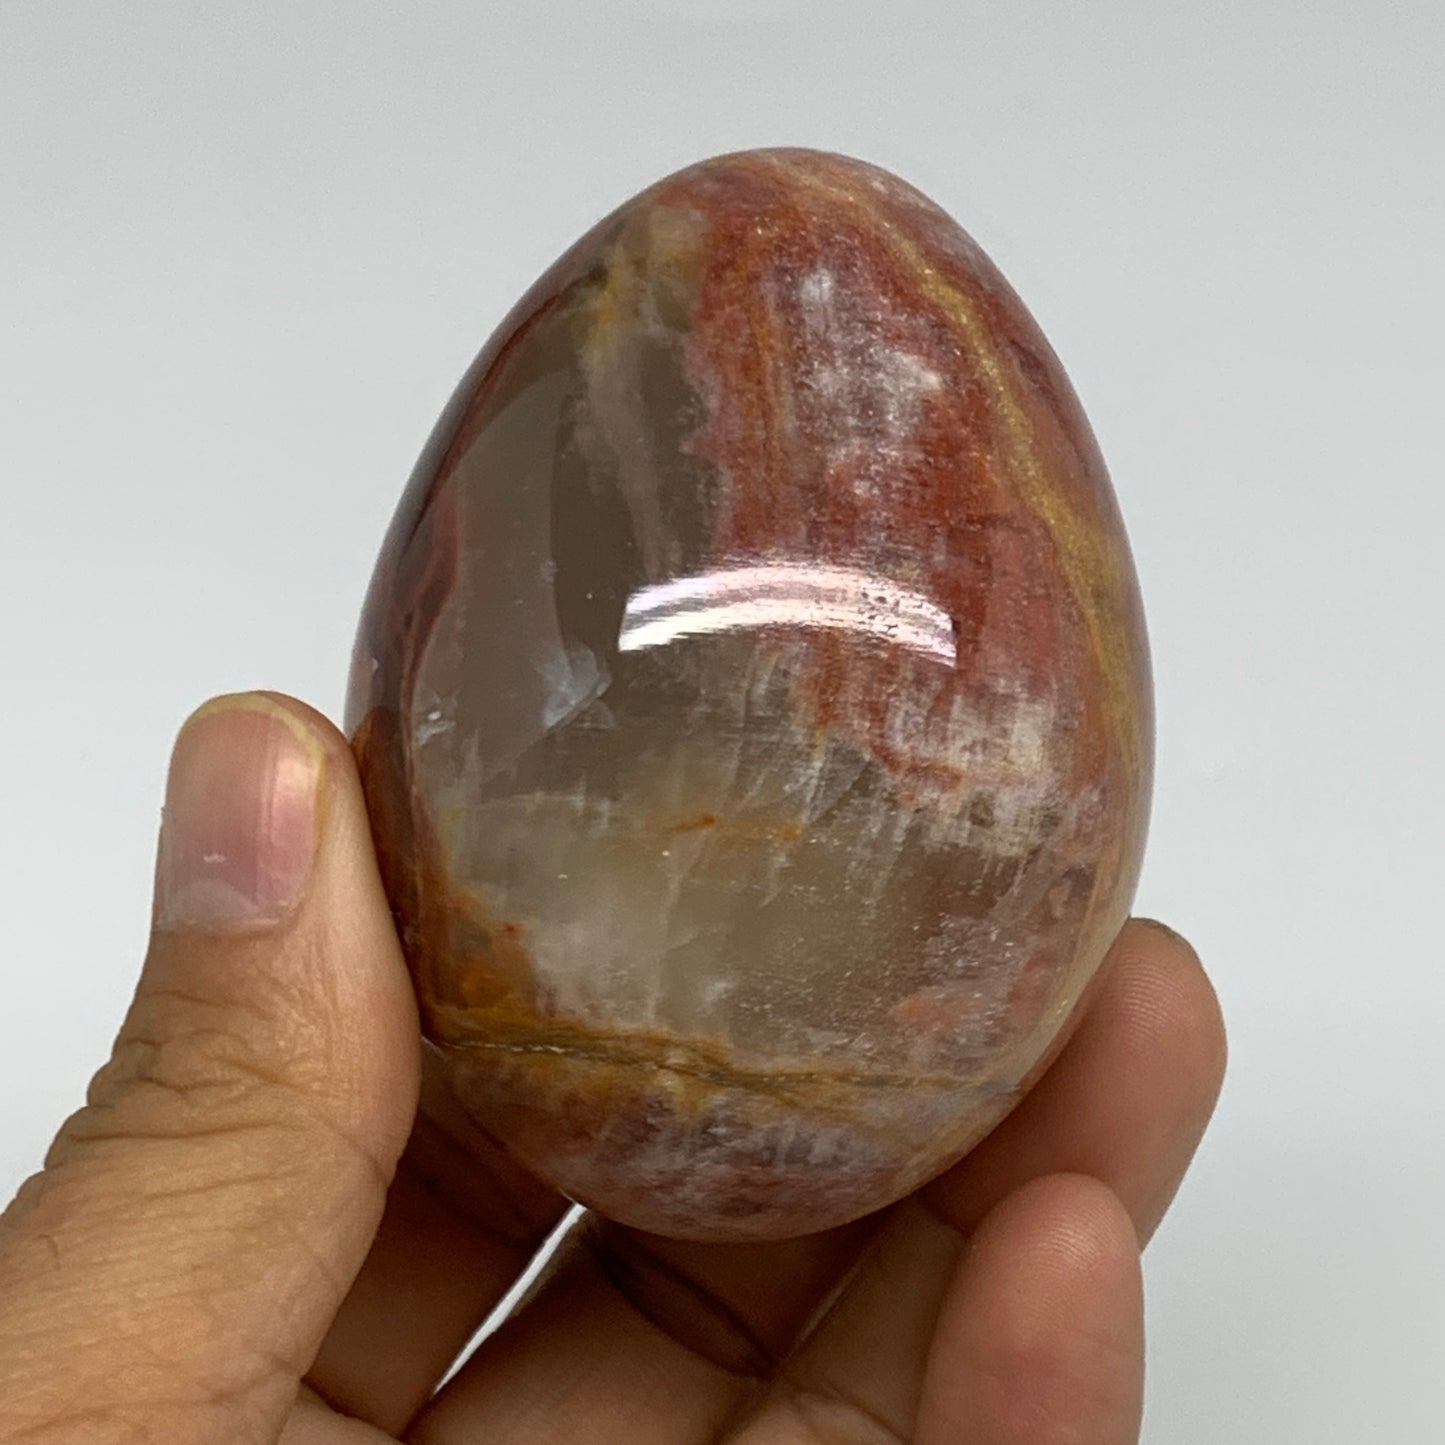 253g, 2.7"x2" Natural Green Onyx Egg Gemstone Mineral, from Pakistan, B32015